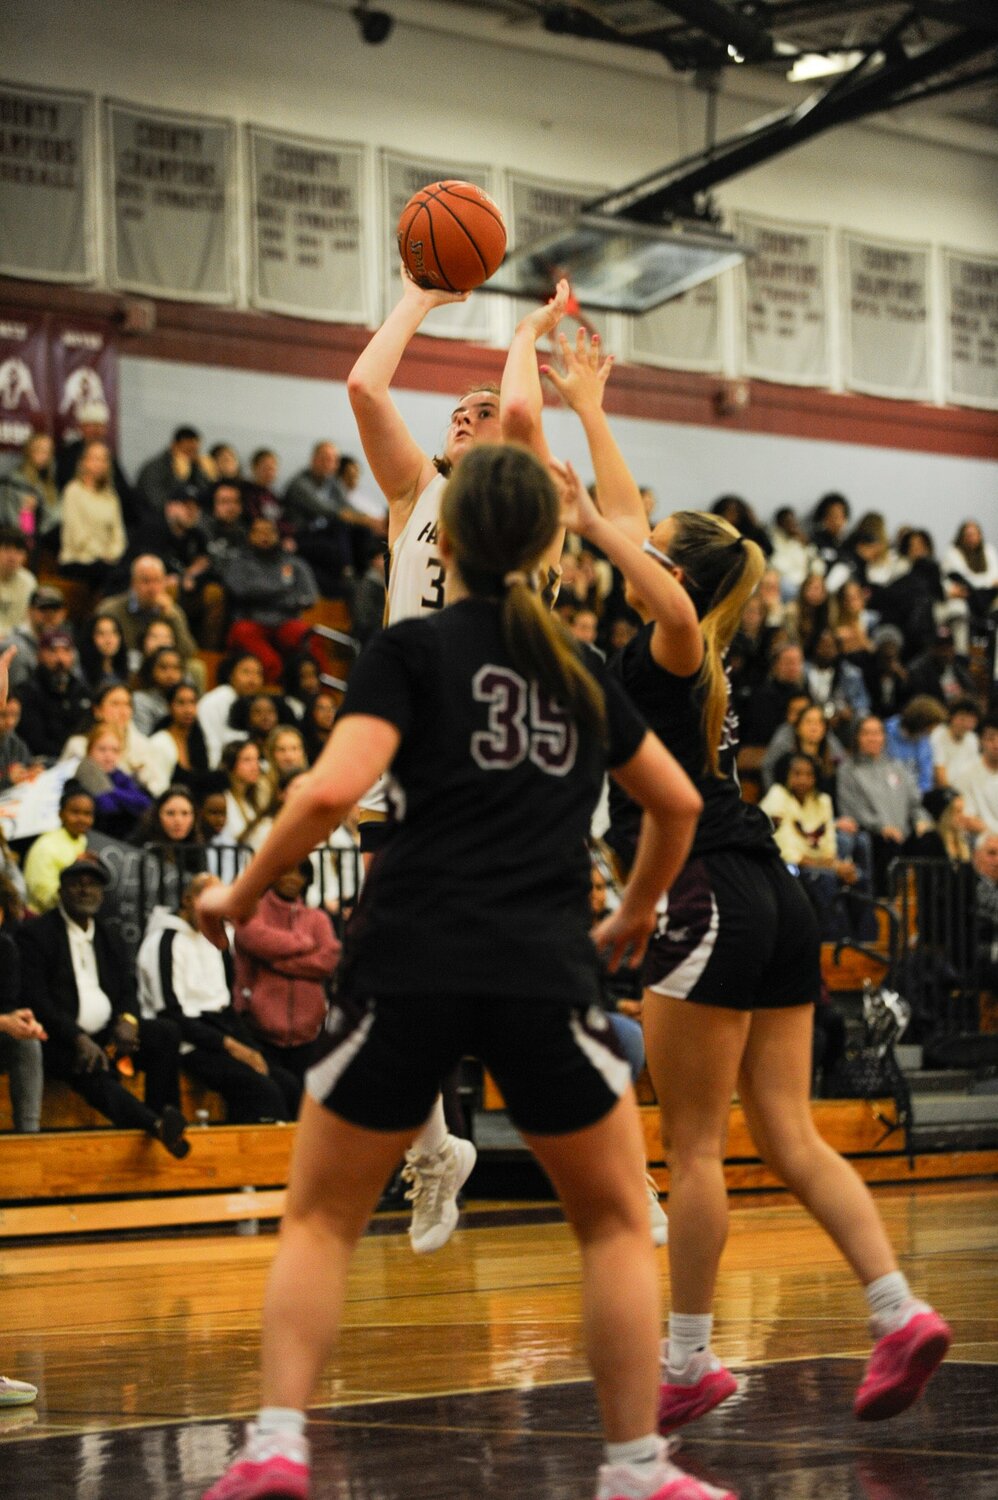 Ryn Feemster attempted a shot against the defense of Broadneck’s Mackenzie Wharton (right).